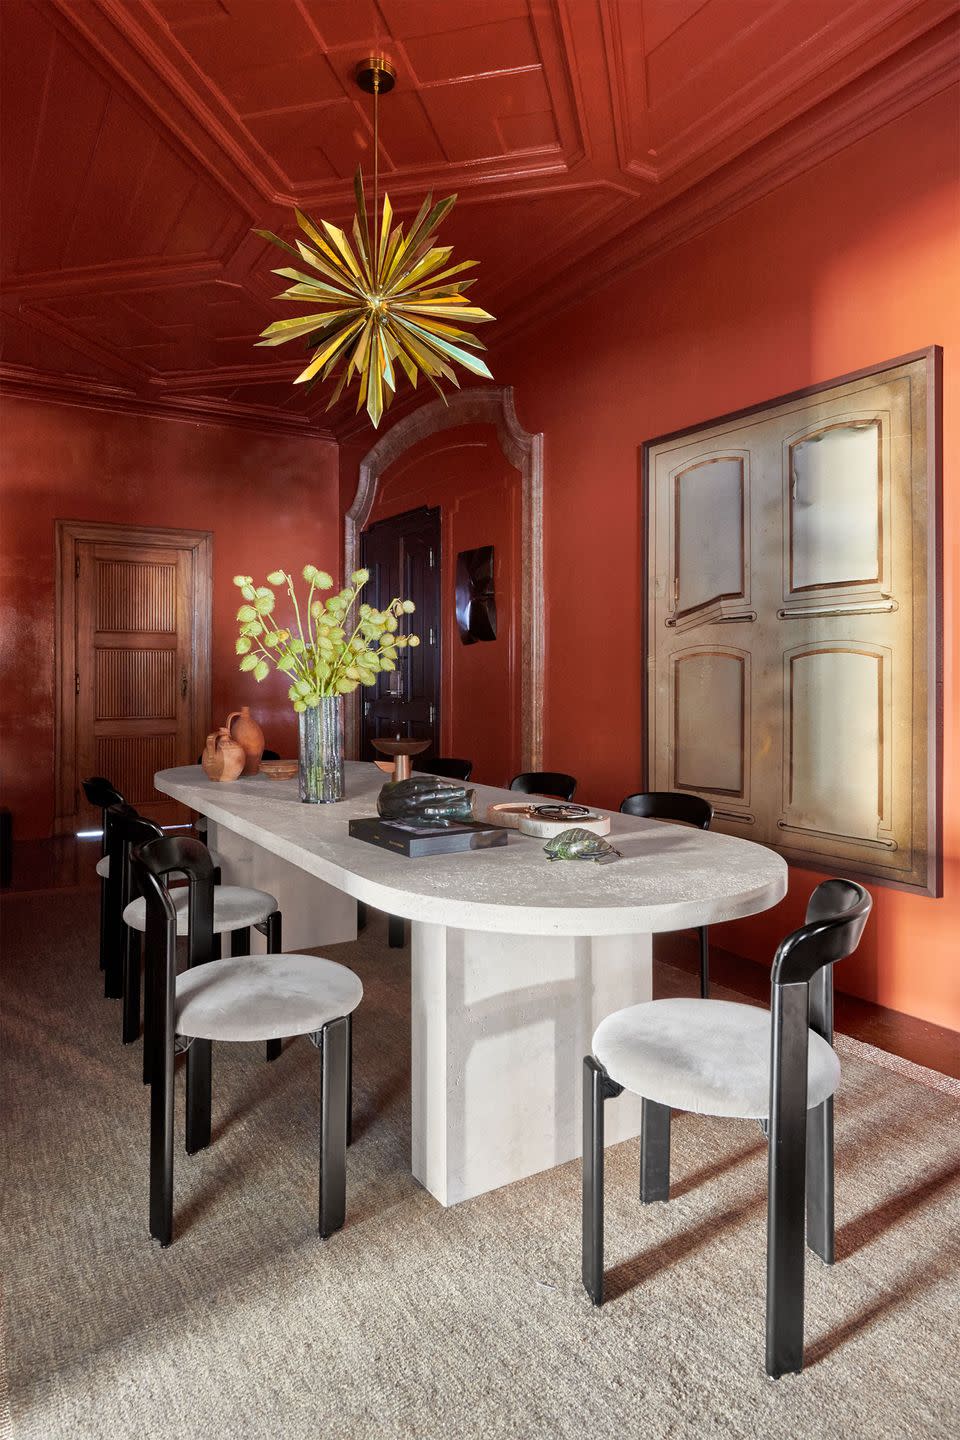 in a dining room is a long white travertine table with rounded ends, eight minimalist black chairs with round seats, rust colored walls, artwork resembling windows with shades, and a spiky gold light pendant